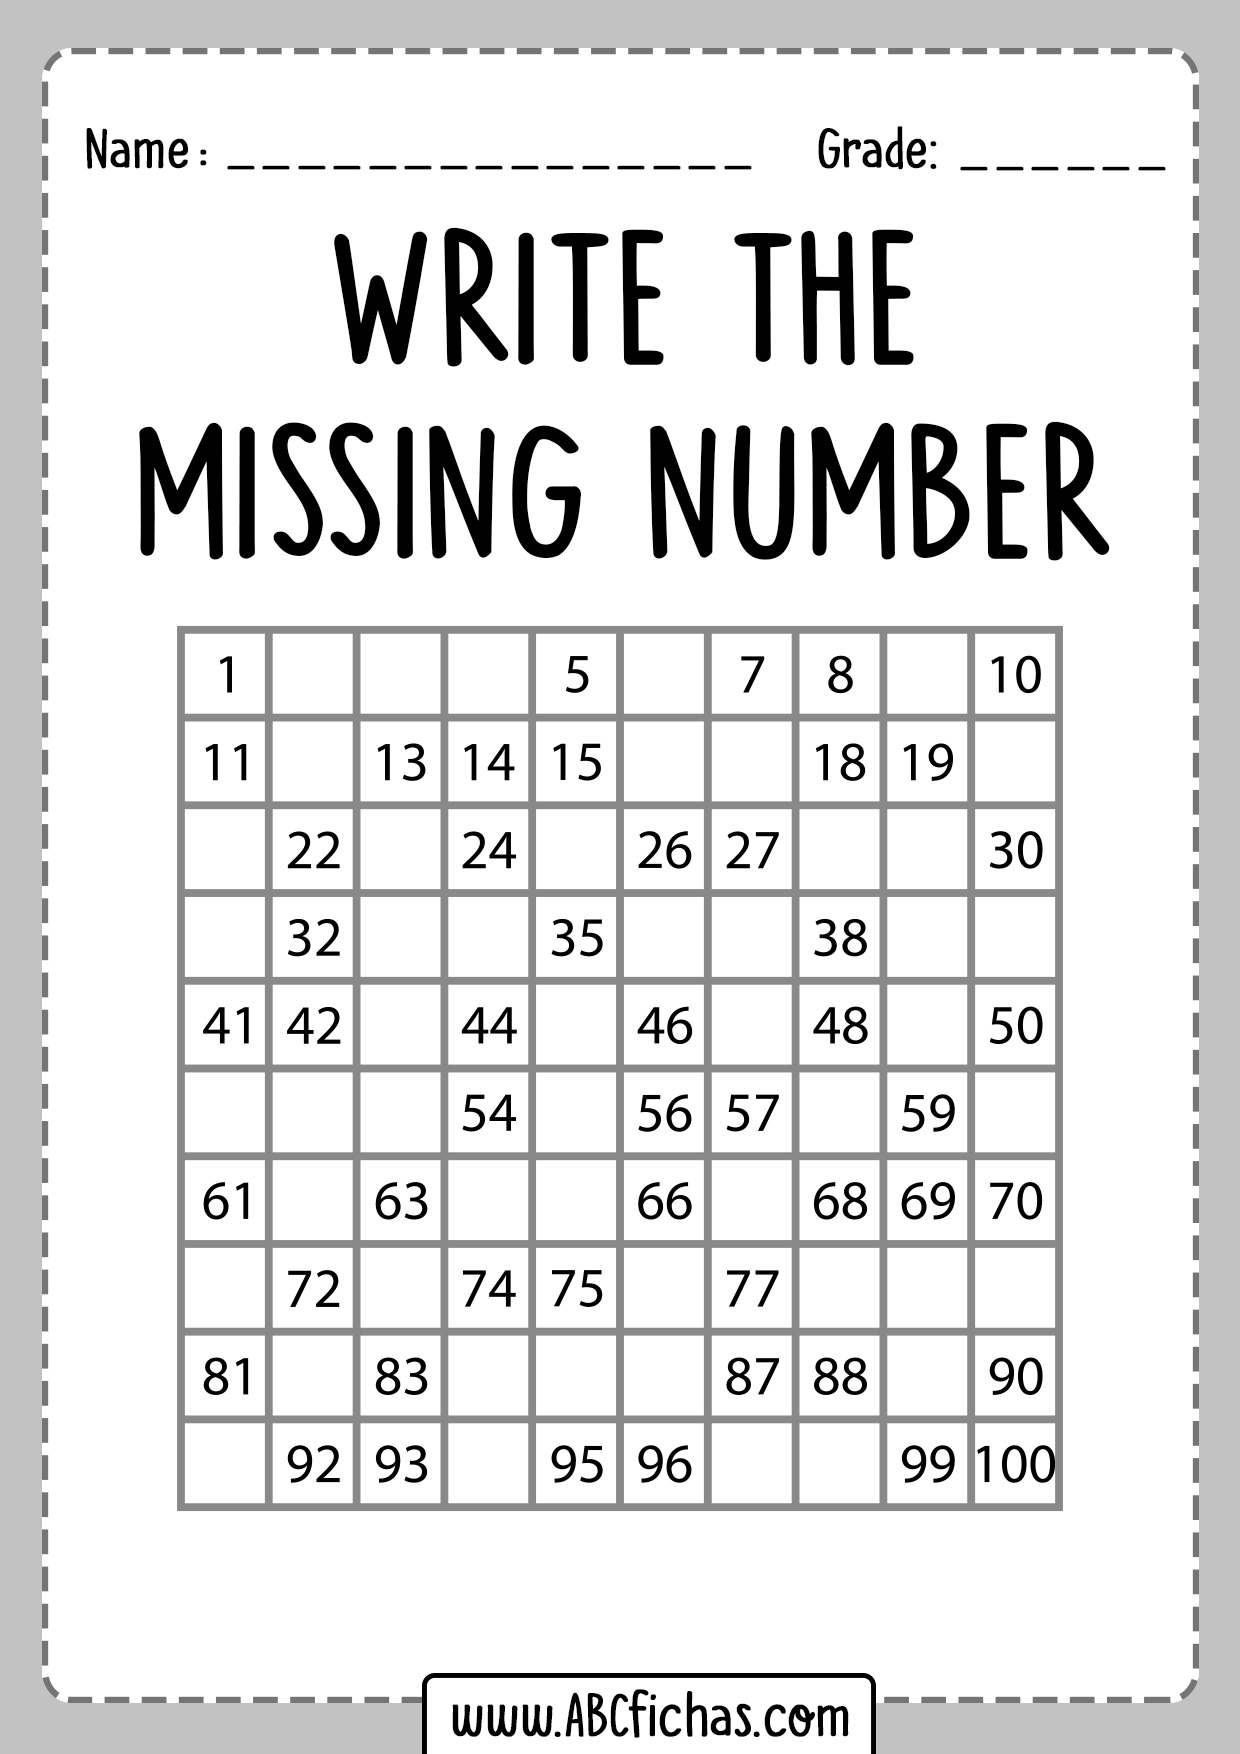 write-the-missing-number-1-100-abc-fichas